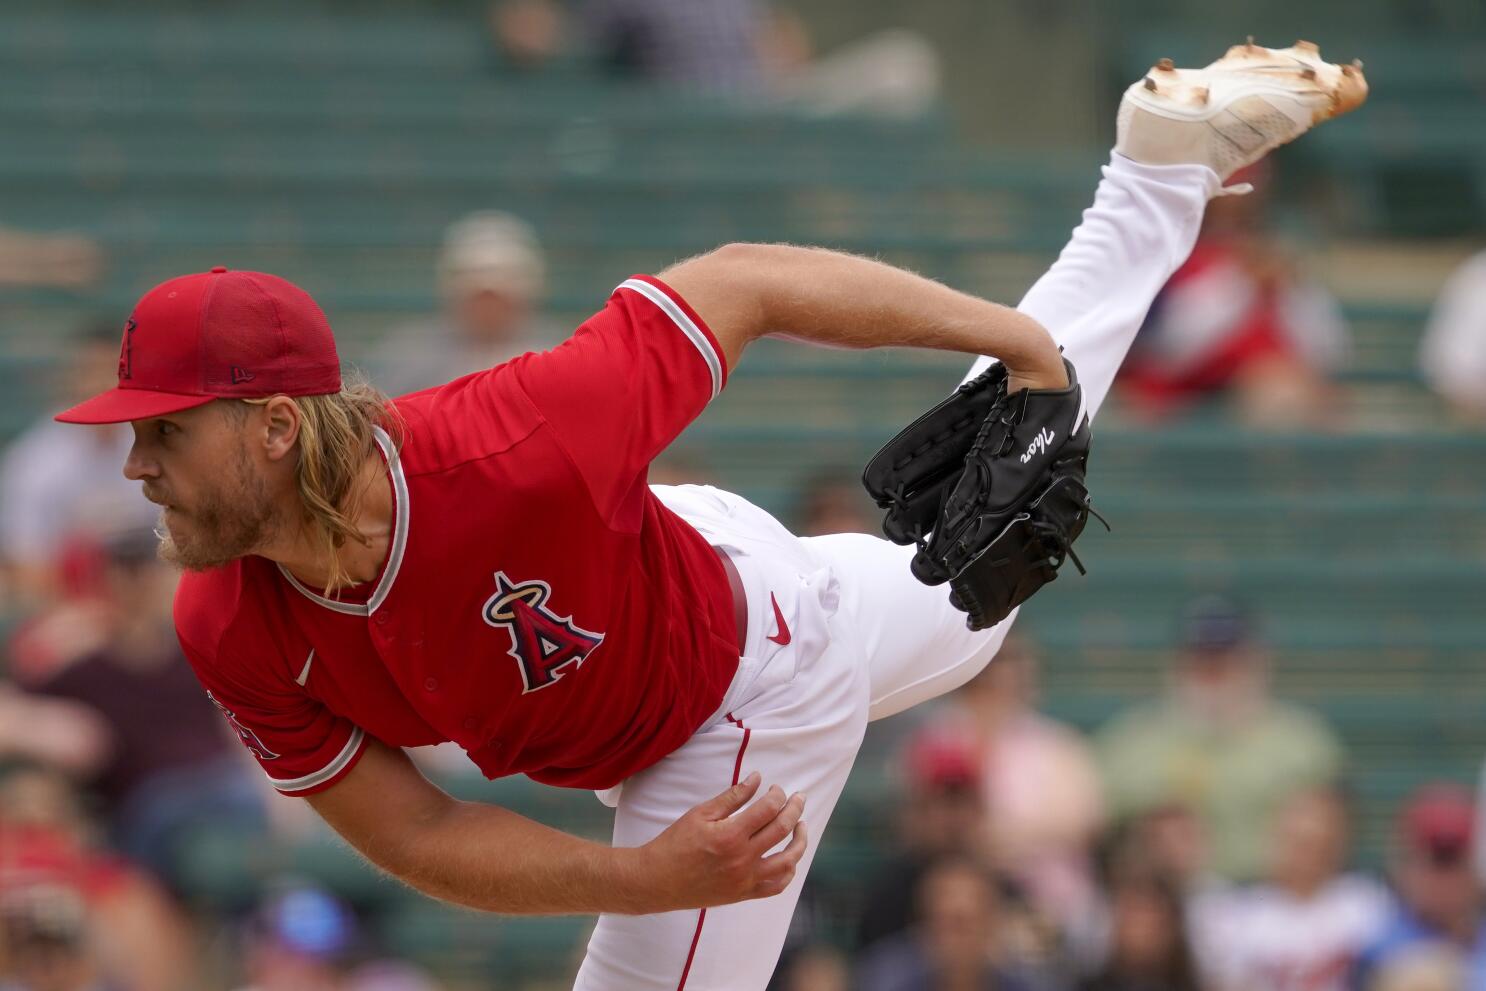 Los Angeles Angels: Ranking the Top 20 Pitchers in Angels History